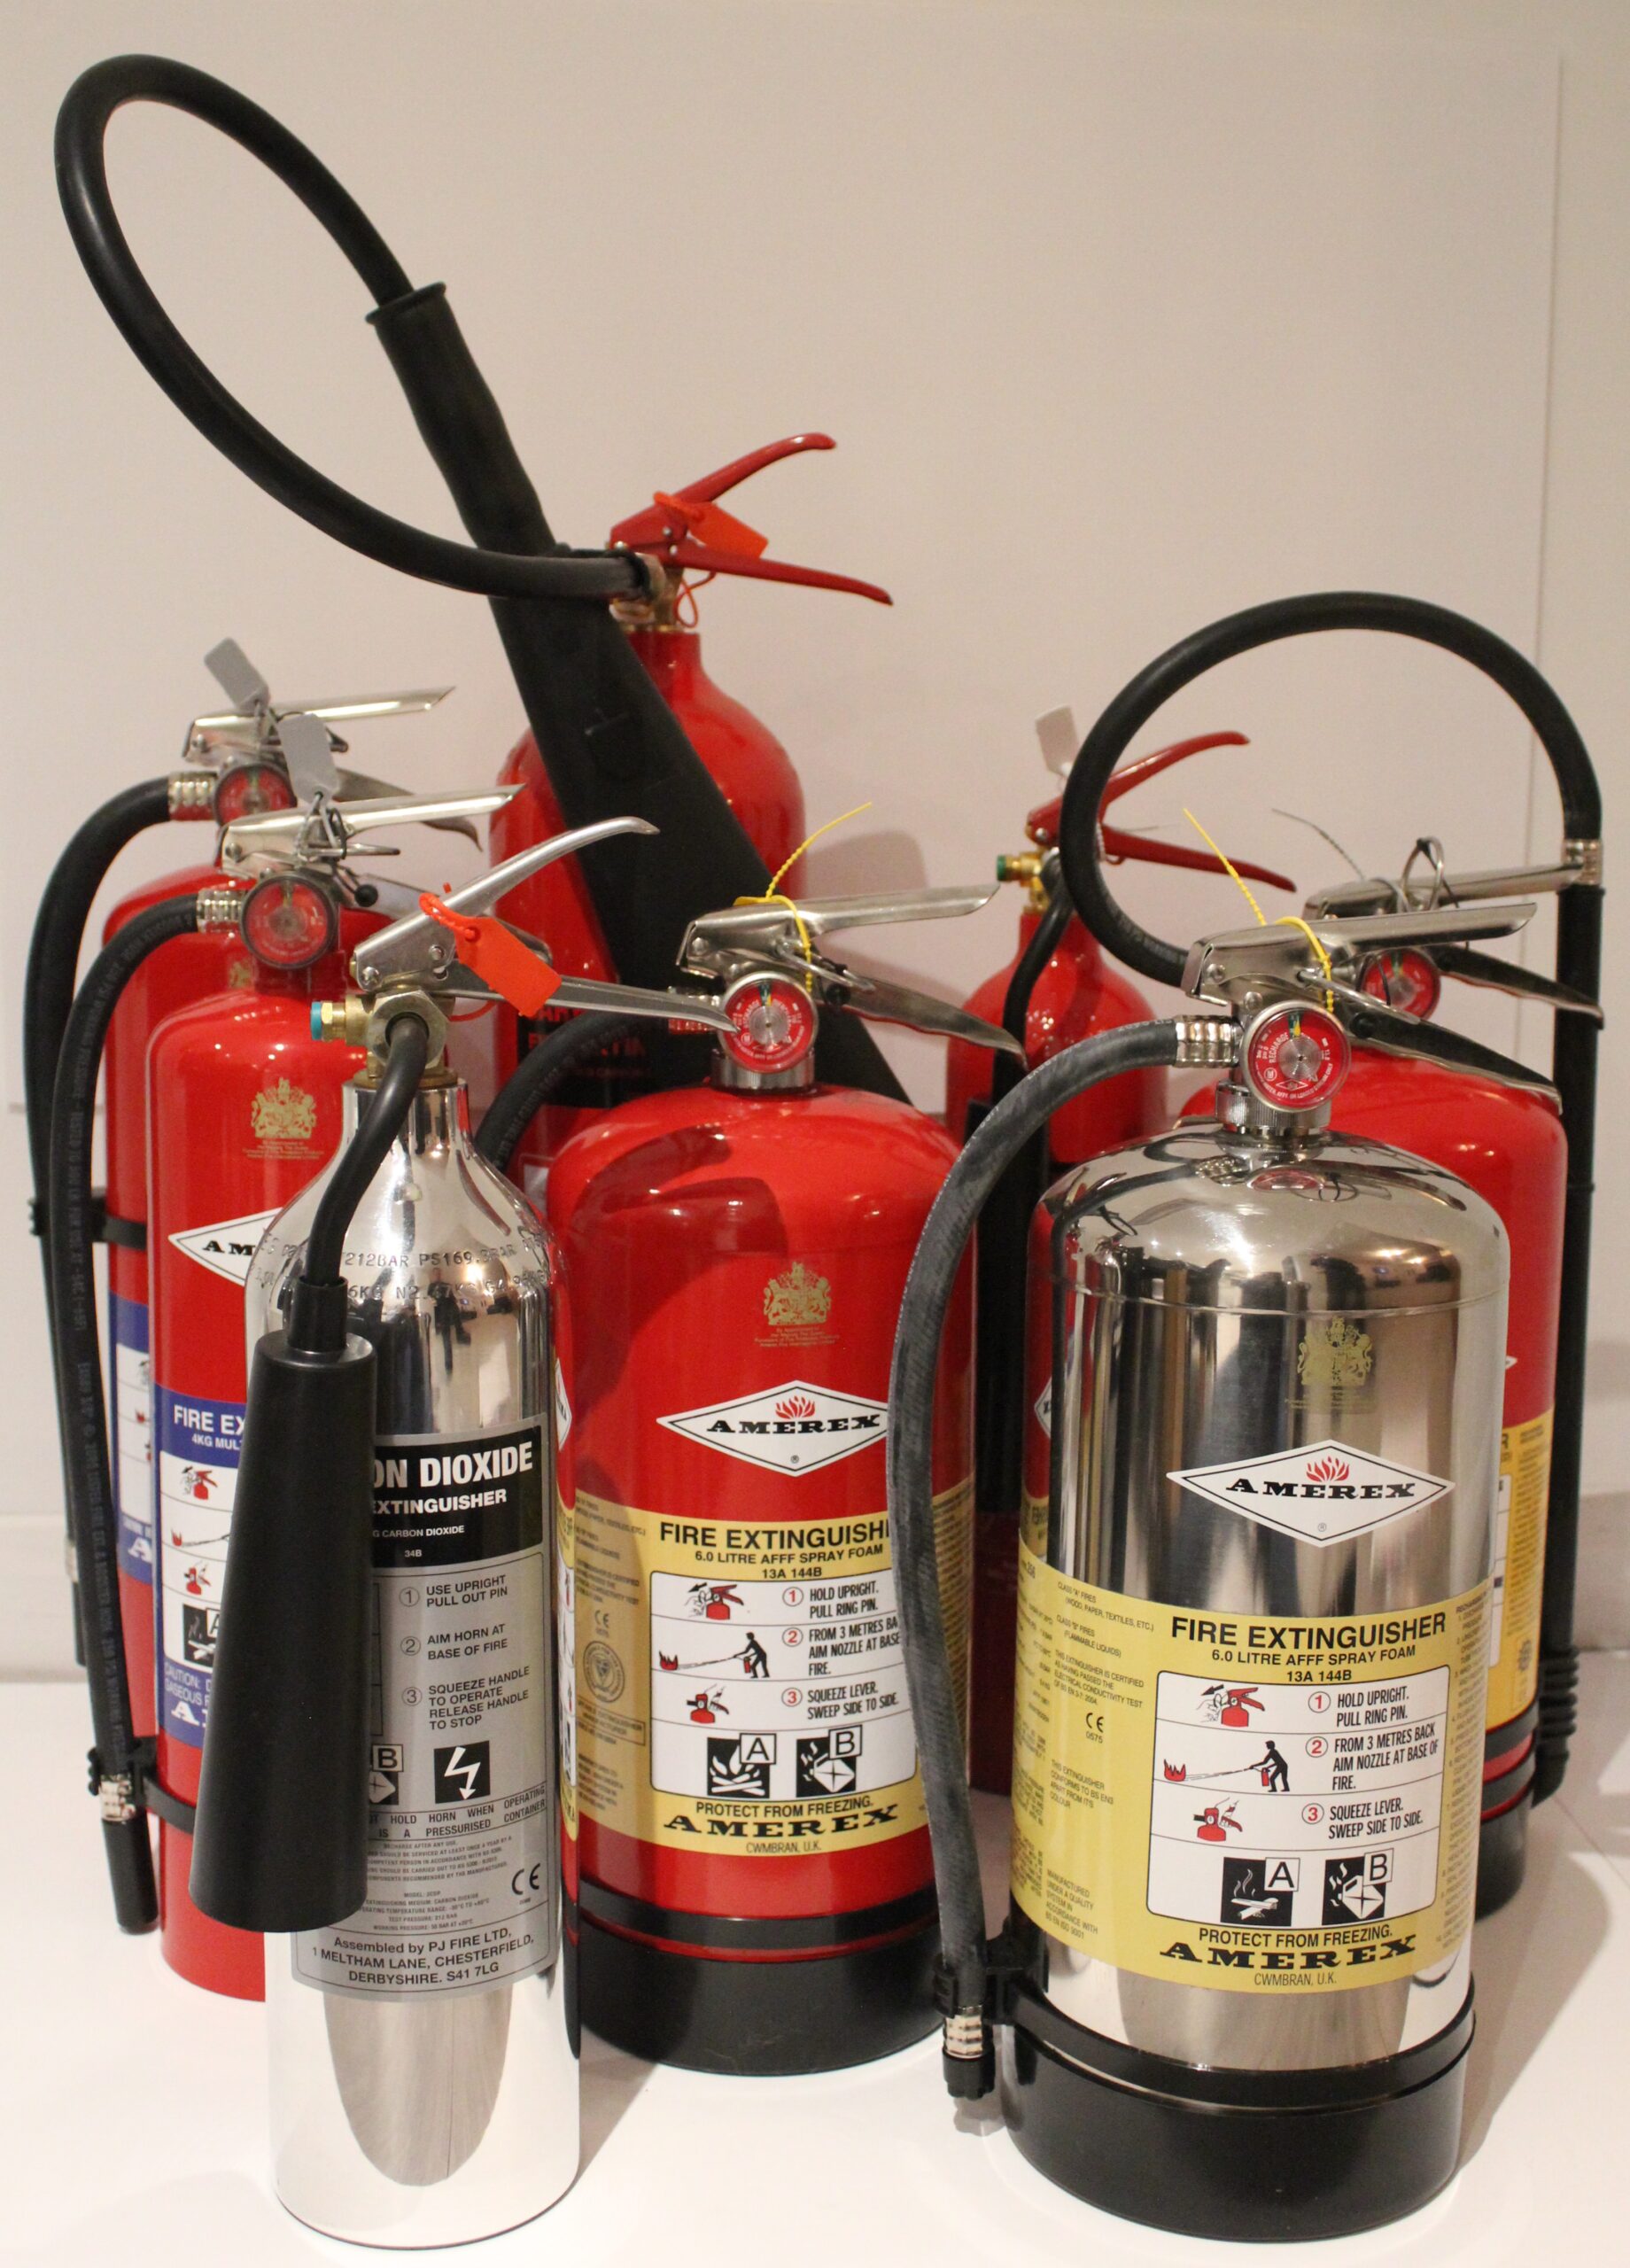 Compliance Fire Ltd | Fire Extinguisher Annual Servicing | Fire Extinguisher Refill Test Discharge | Fire Risk Assessments | Fire Signage | Emergency Lighting | Fire Alarms | Fire Safety Training